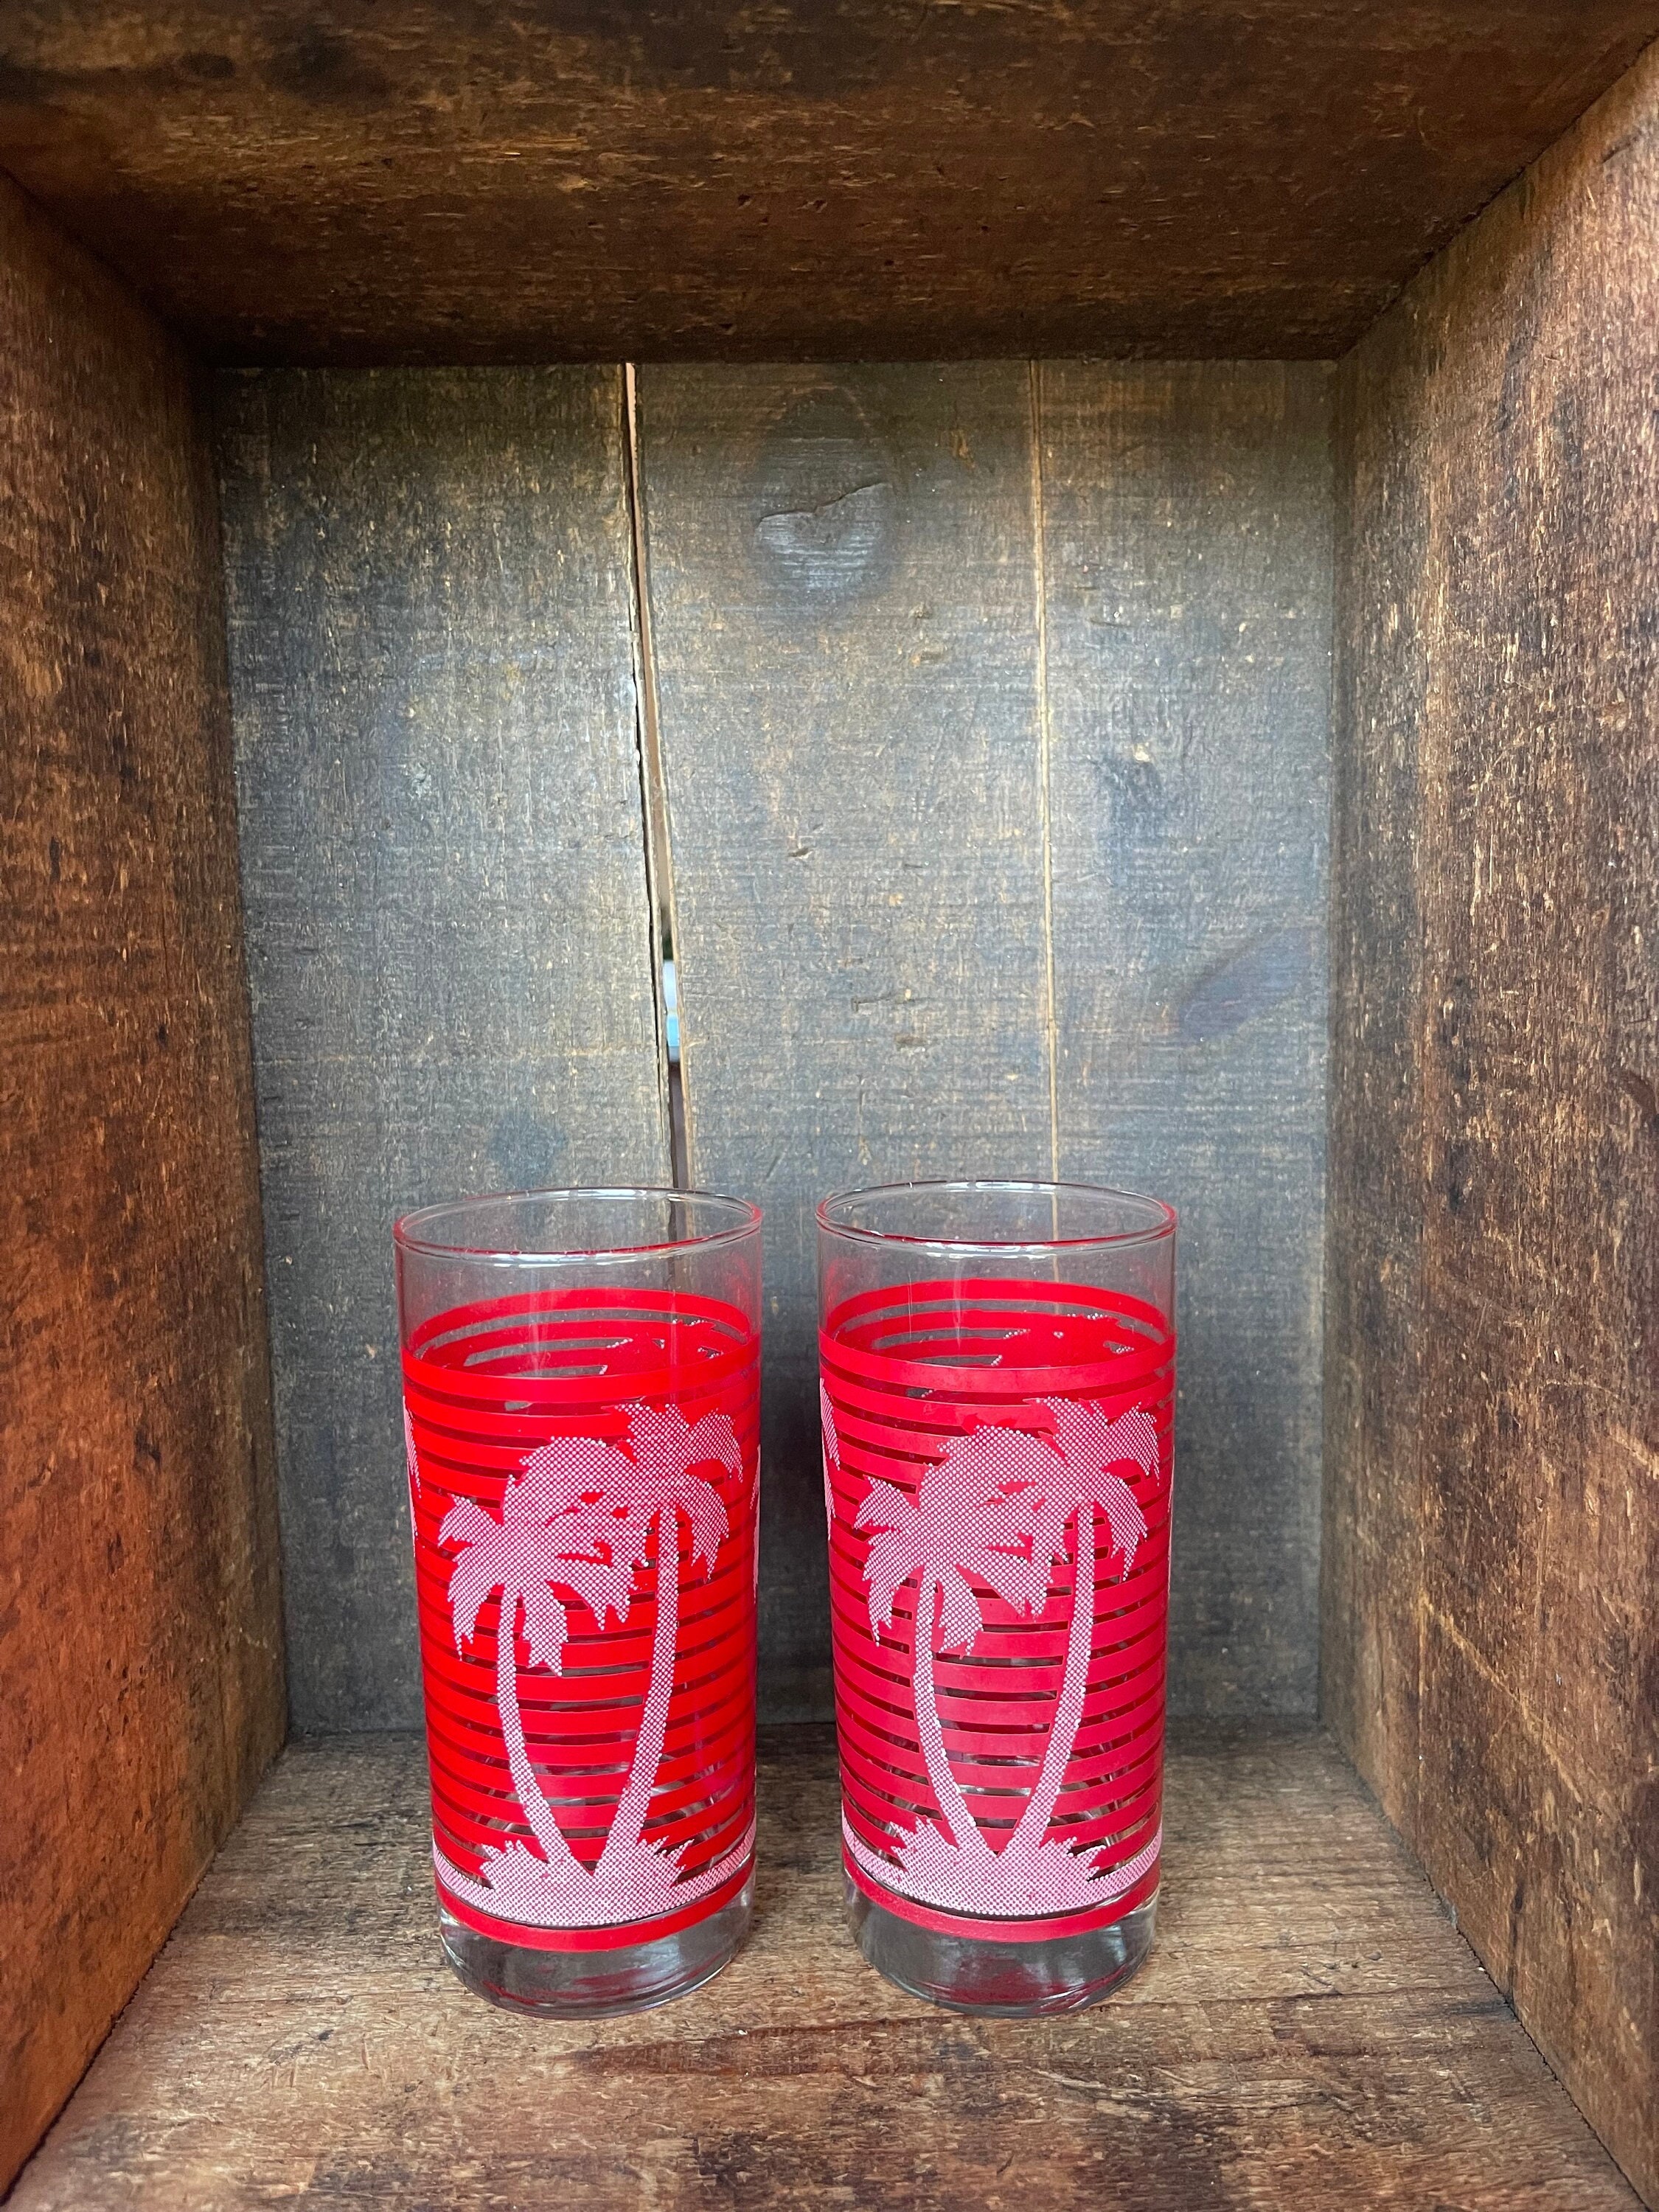 Palm Paradise Interiors Durable and Trendy Glassware - Palmetto Tree Rocks  Drinking Glass, Ideal for Any Event